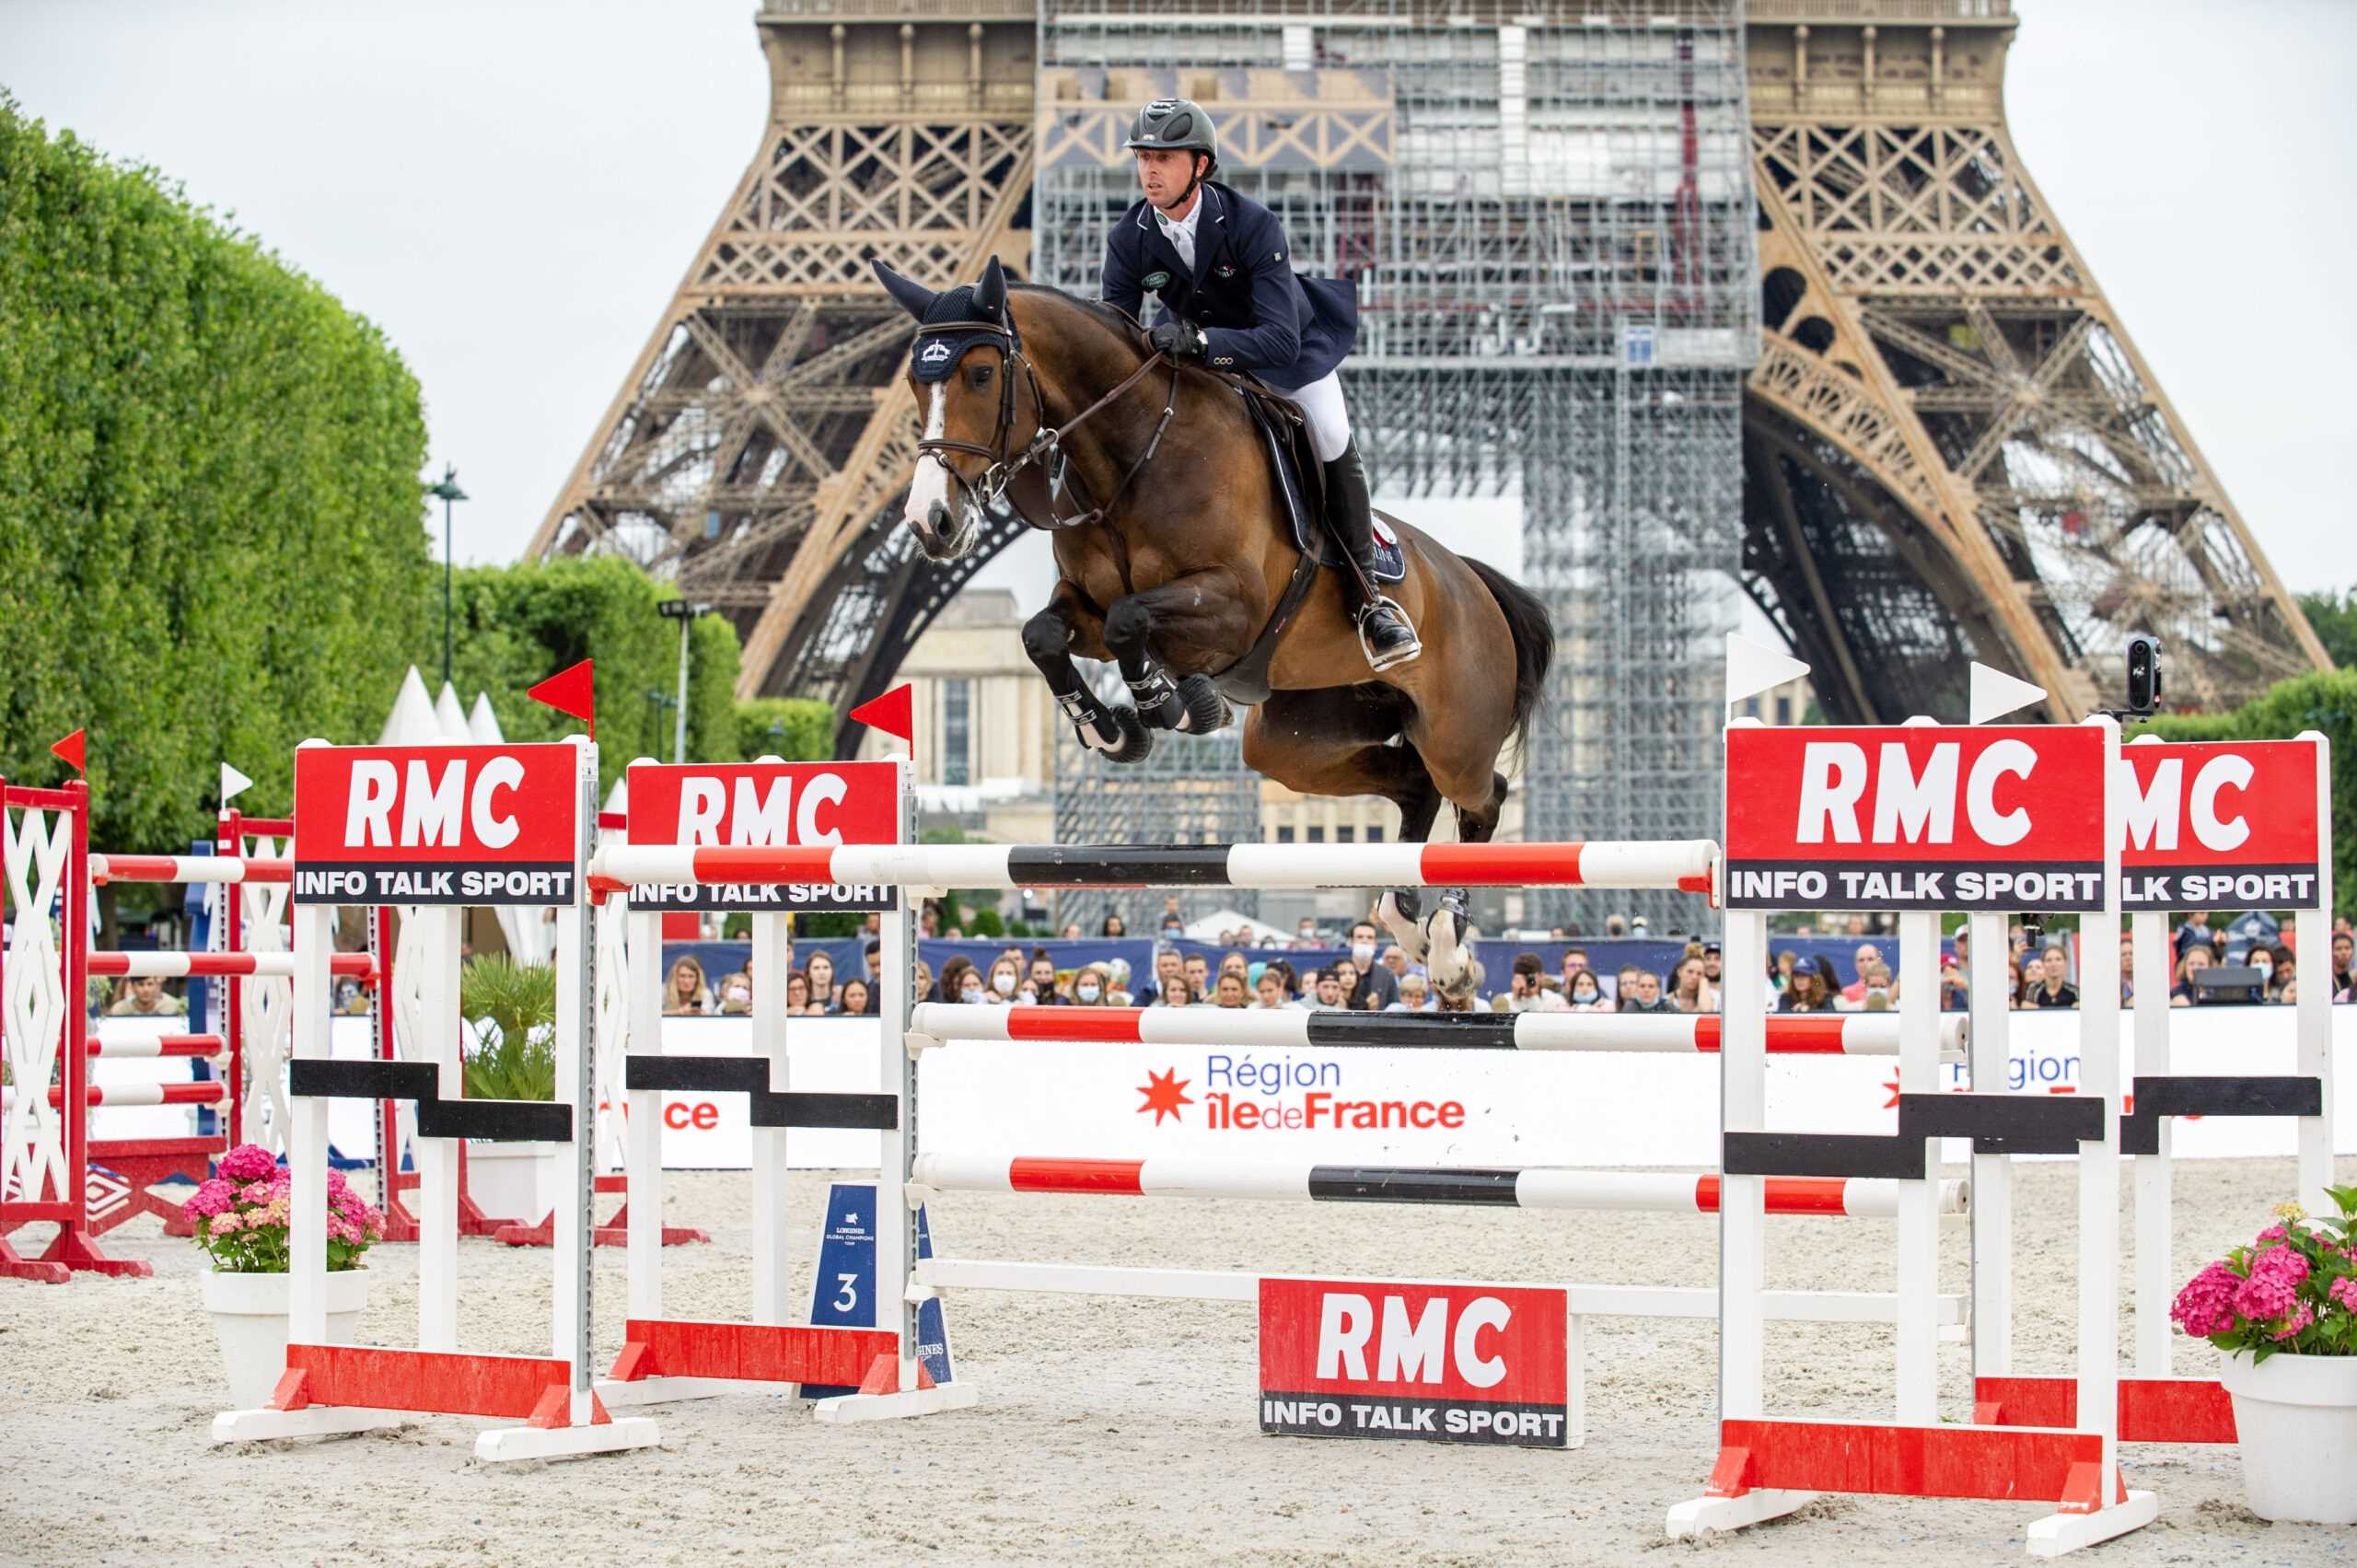 12 Facts About Longines Global Champions Tour - Facts.net